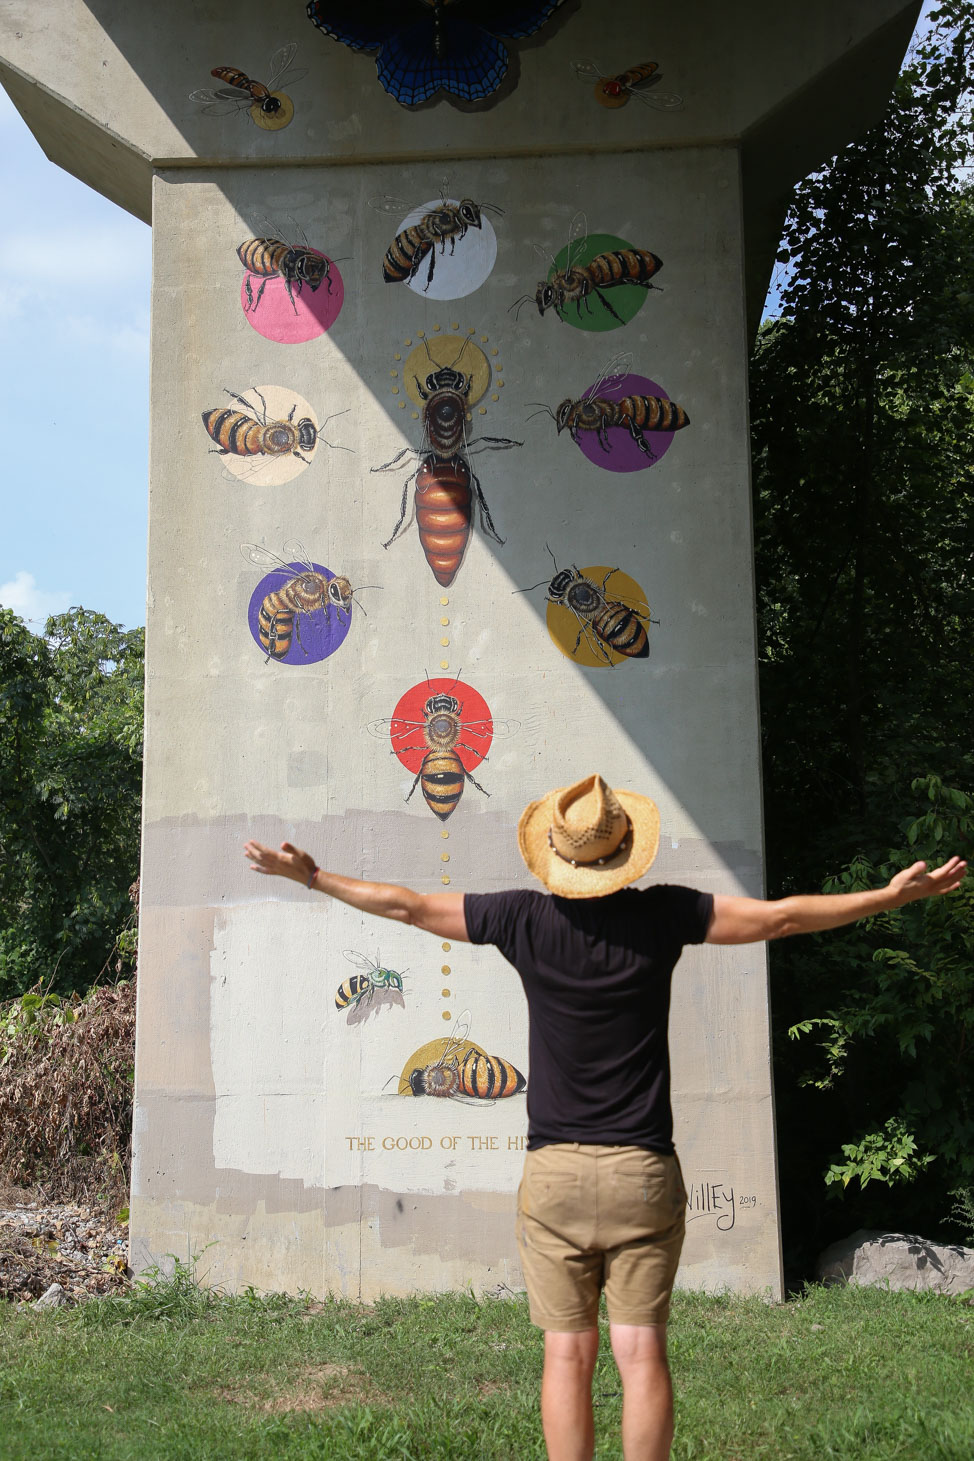 The Good of the Hive mural in Manchester, Tennessee